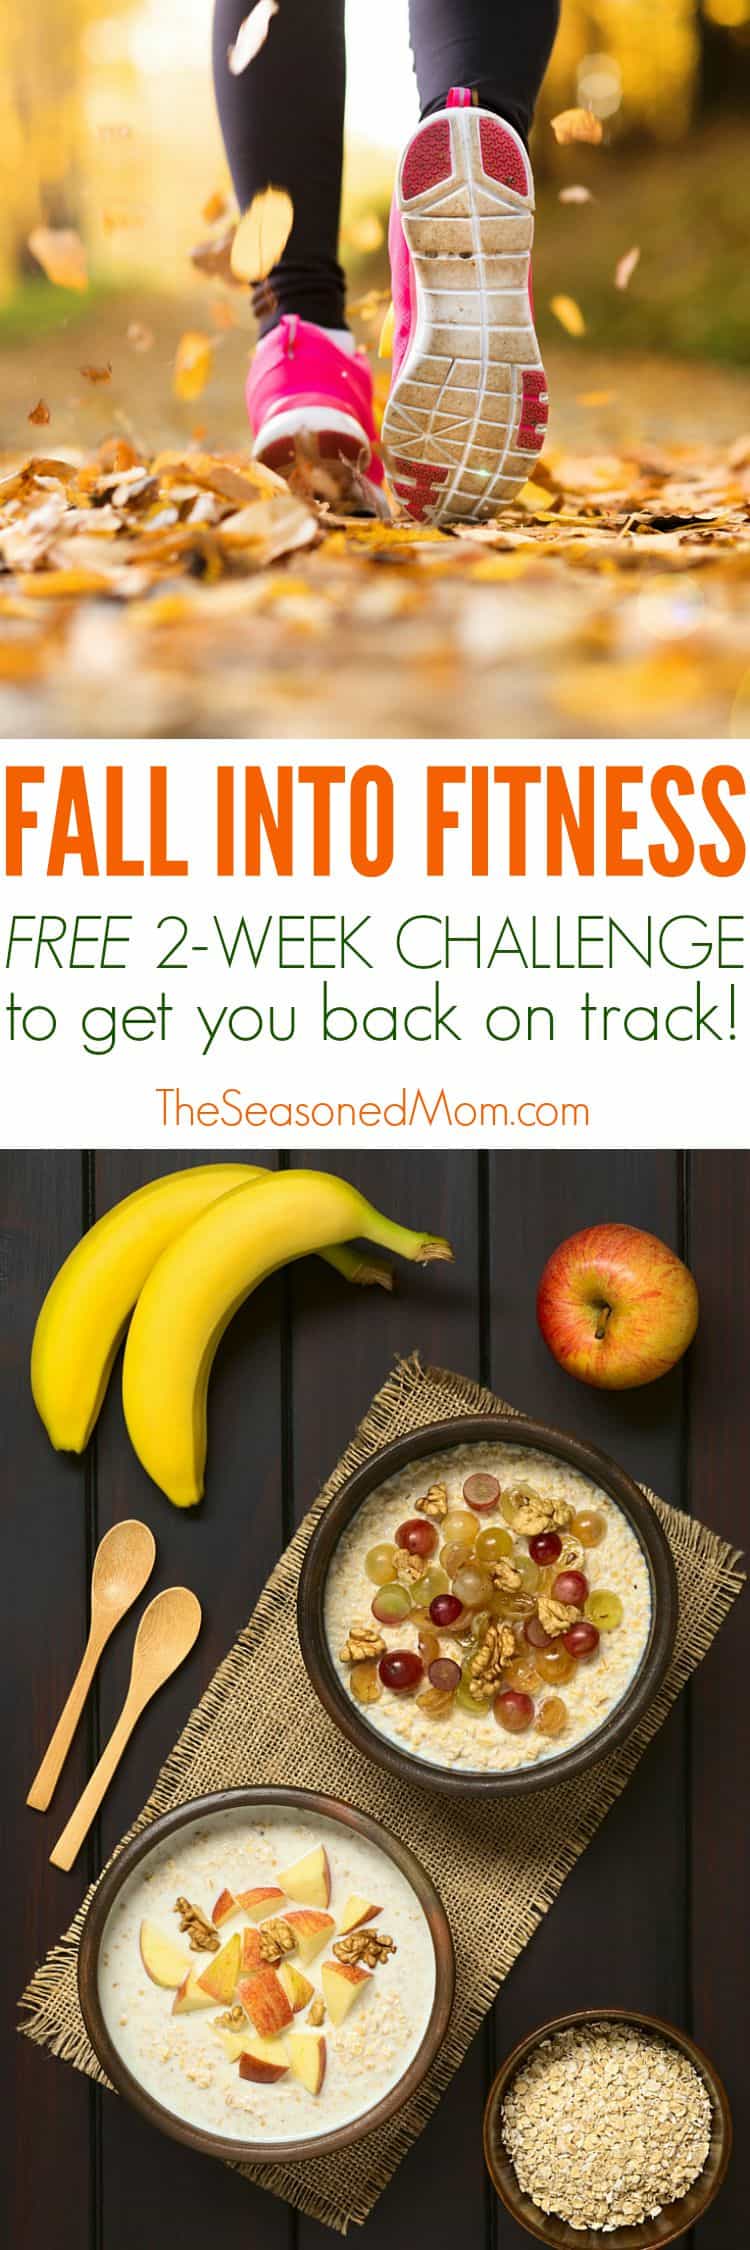 Fall Into Fitness Free Two Week Challenge